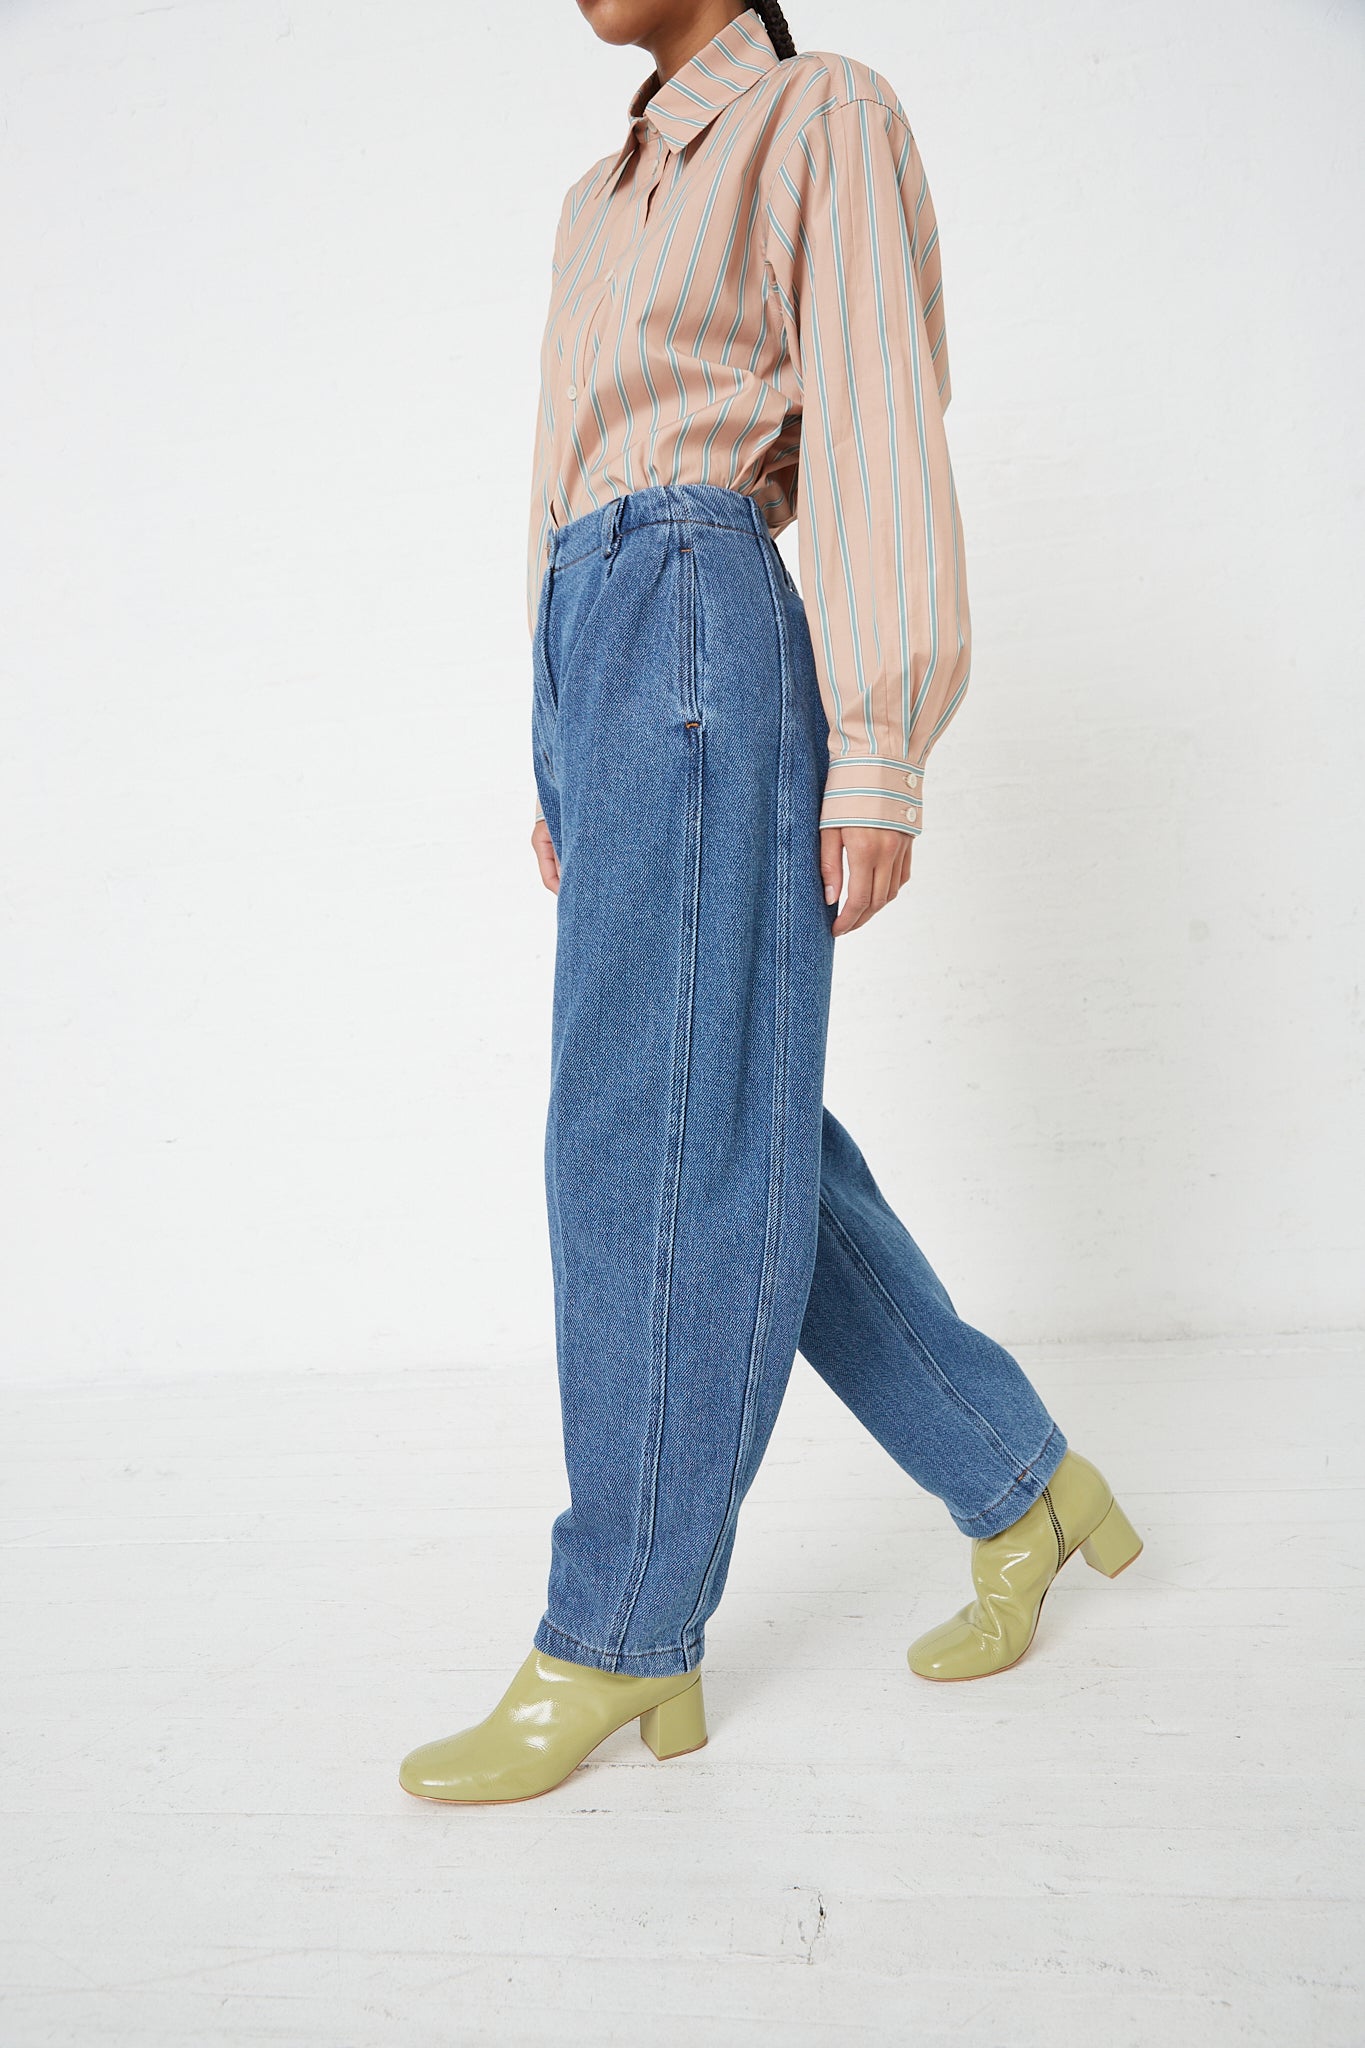 A woman in Rachel Comey's Denim Percy Pant in Indigo with a cocoon silhouette and a striped shirt.